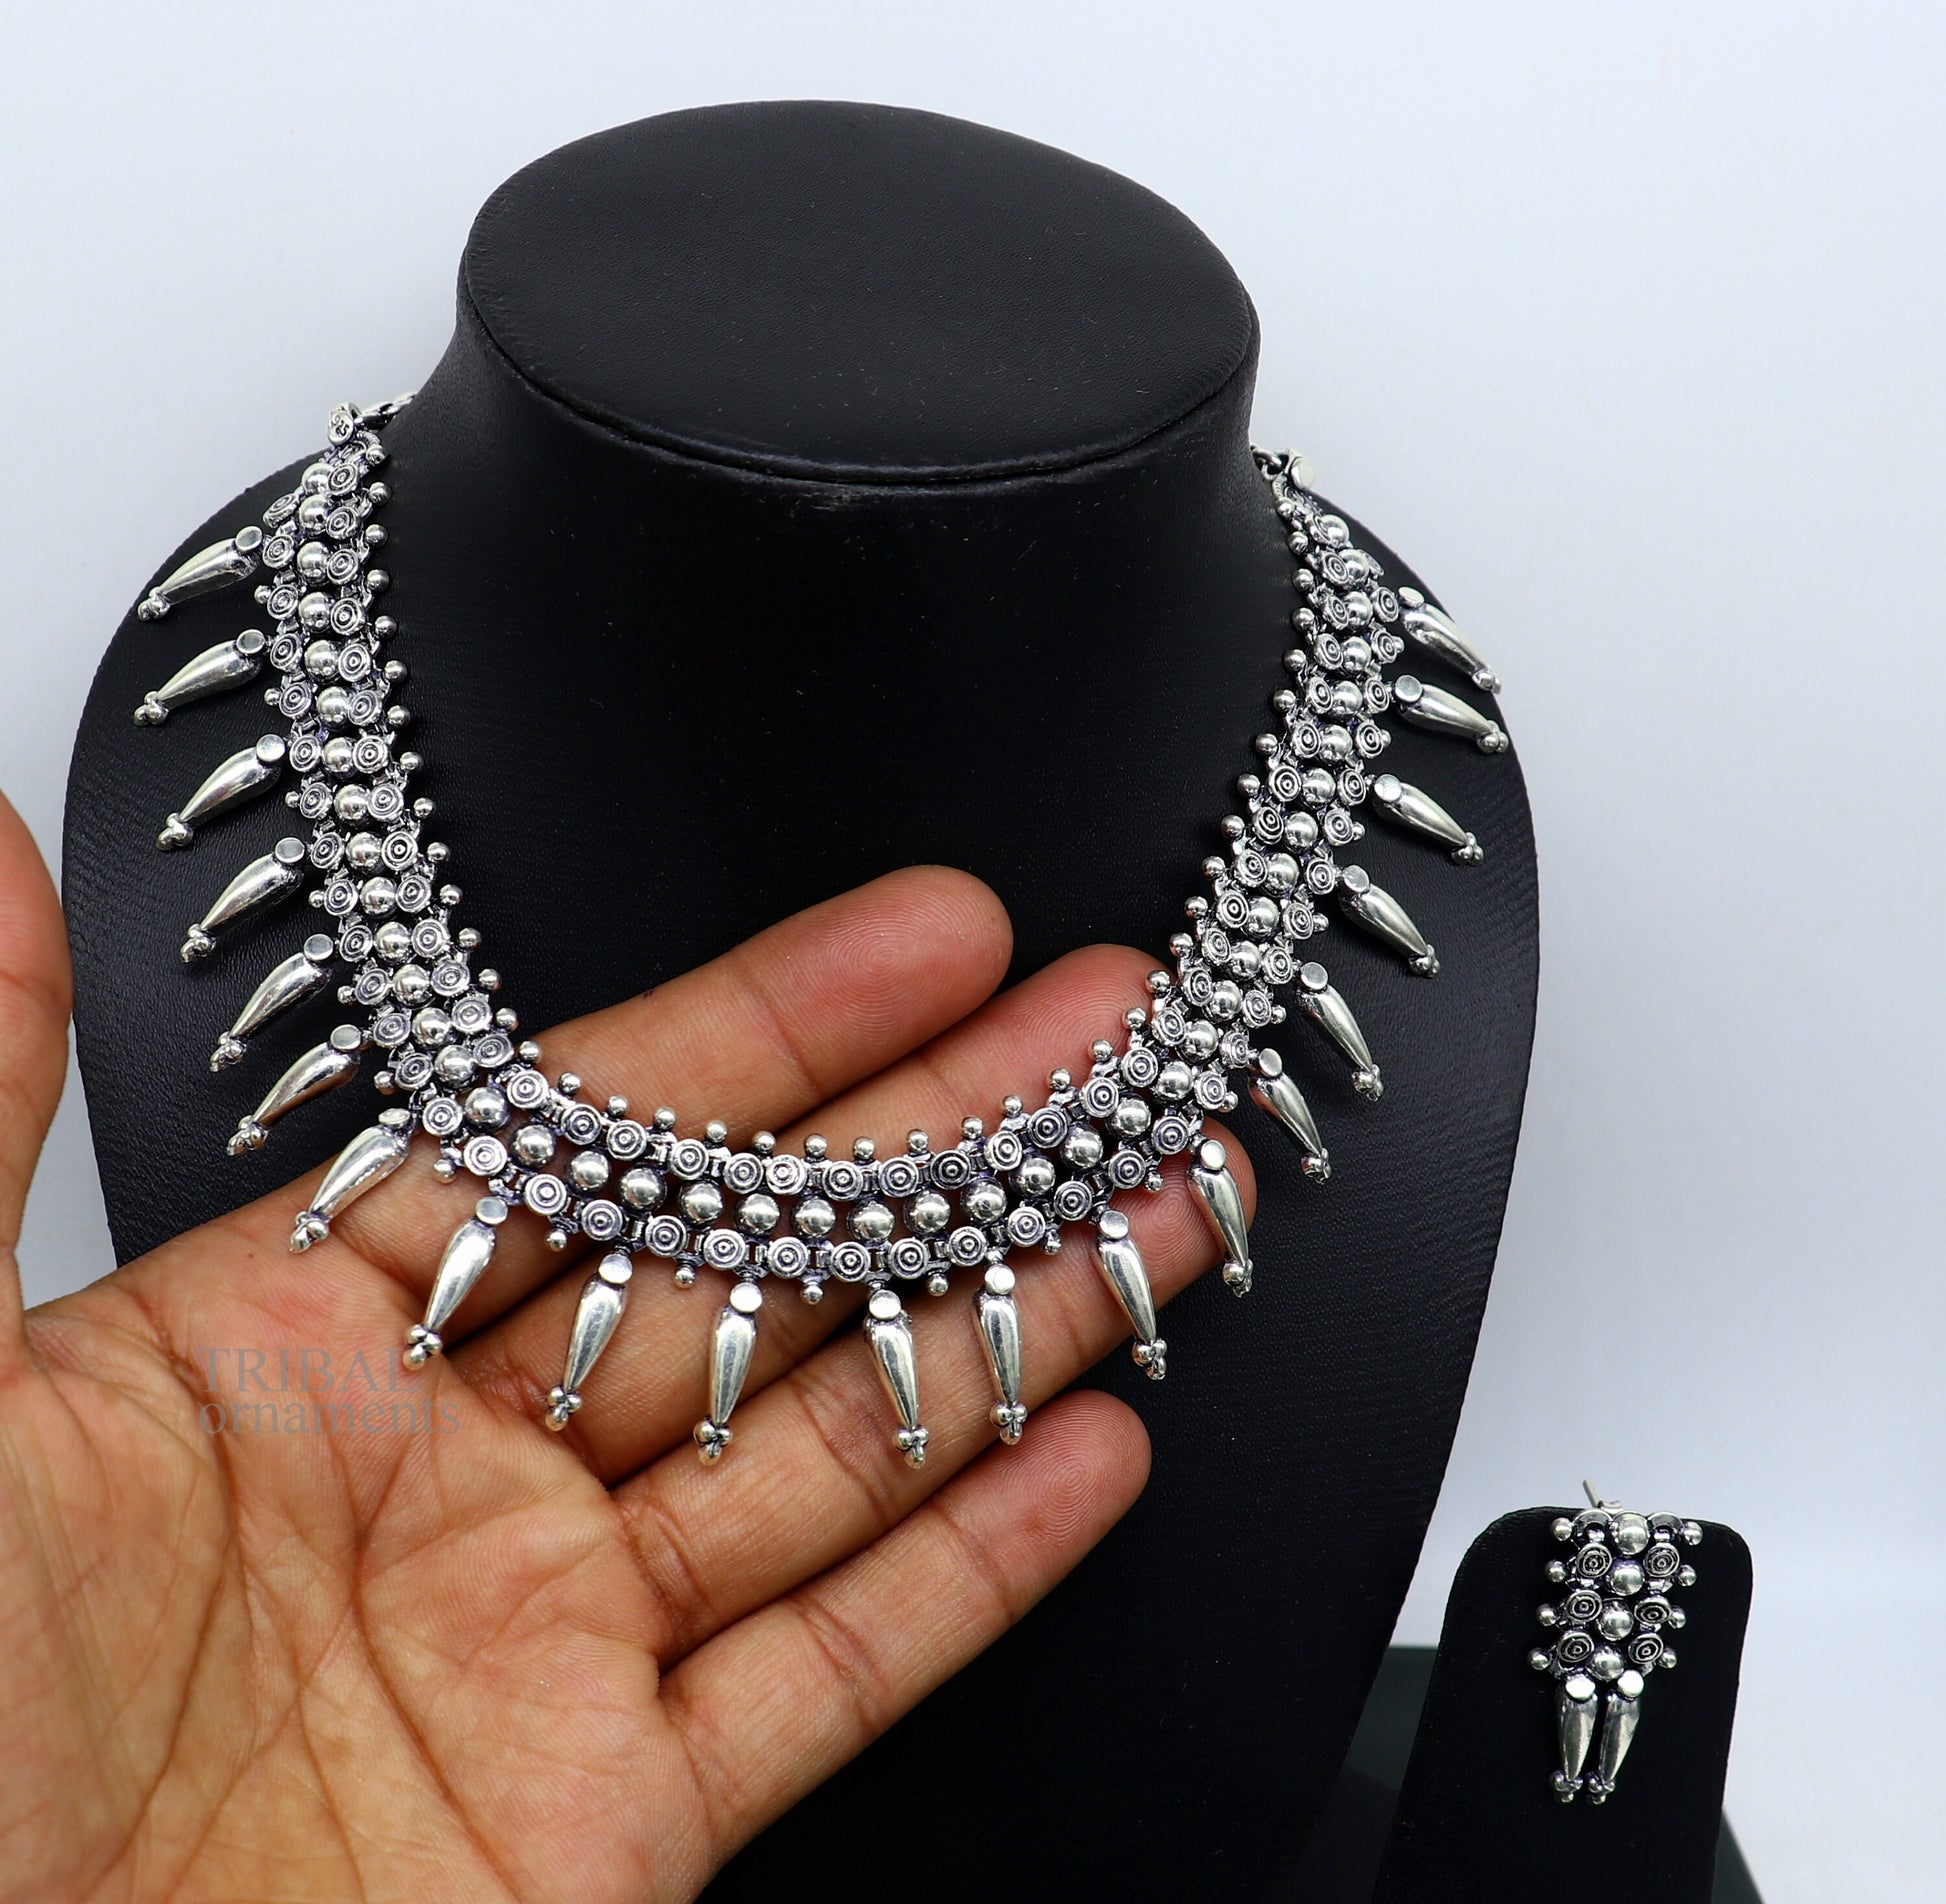 925 sterling silver handcrafted vintage design ethnic necklace, excellent wedding gifting tribal brides belly dance jewelry india nec287 - TRIBAL ORNAMENTS